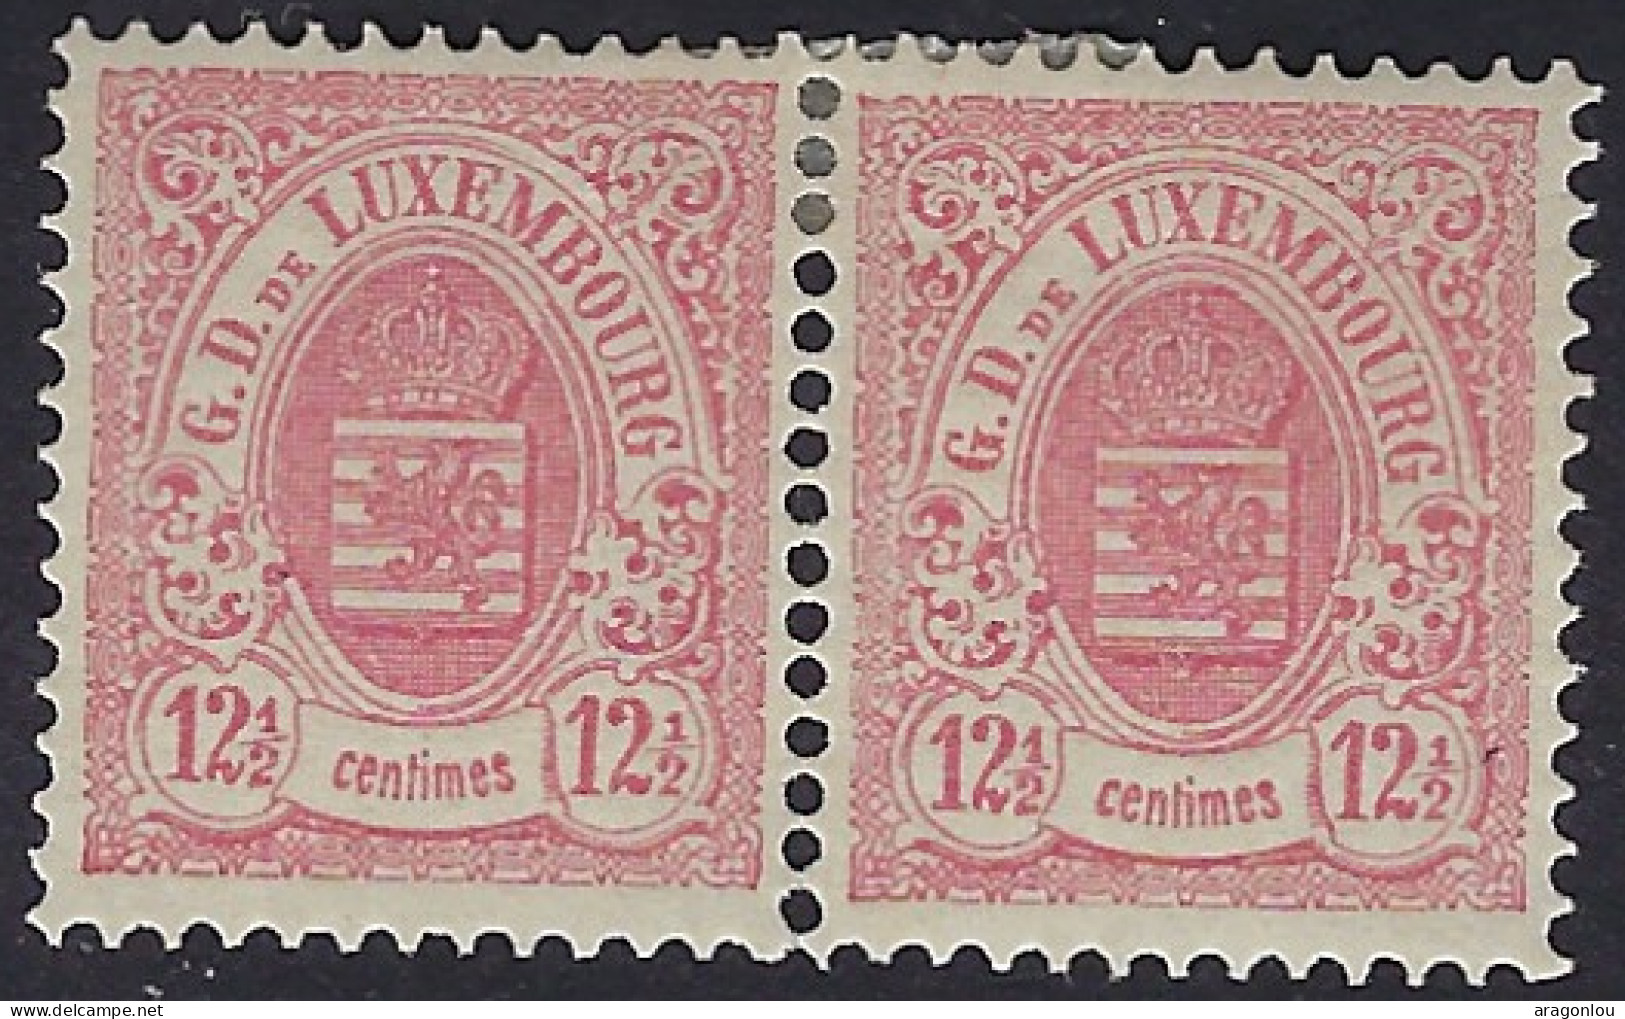 Luxembourg - Luxemburg - Timbres - Armoires 1880    12,5C.    *    1 Paire     Michel 41 D - 1859-1880 Wapenschild